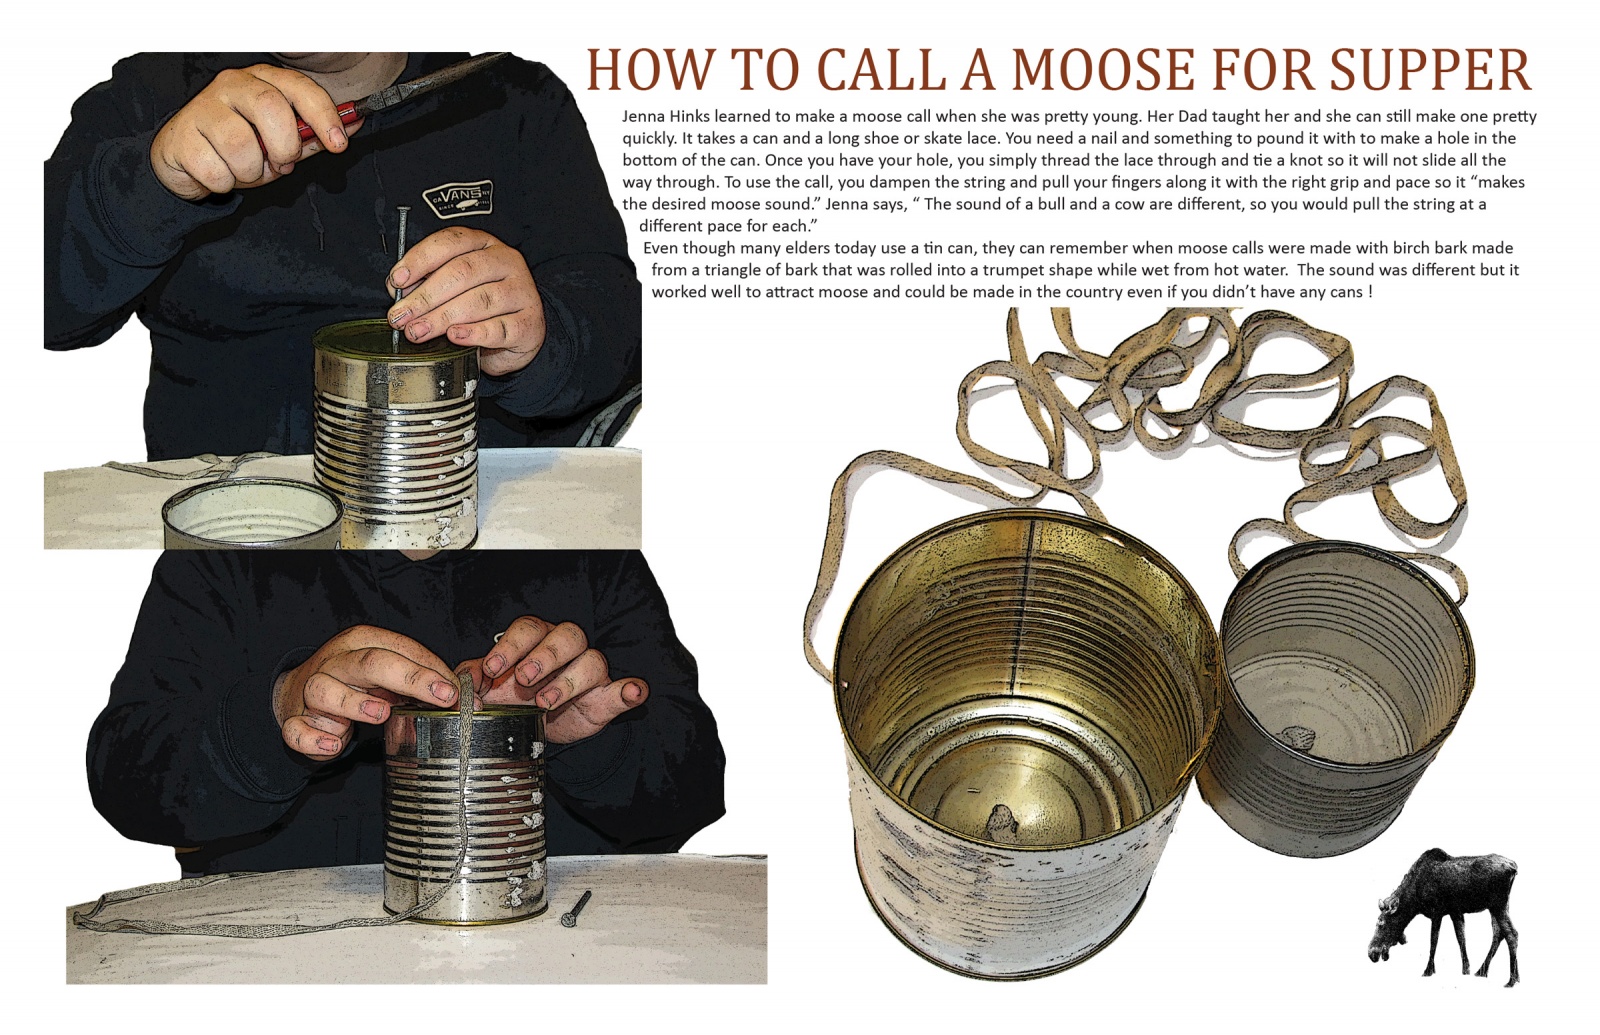 How to Call a Moose for Supper